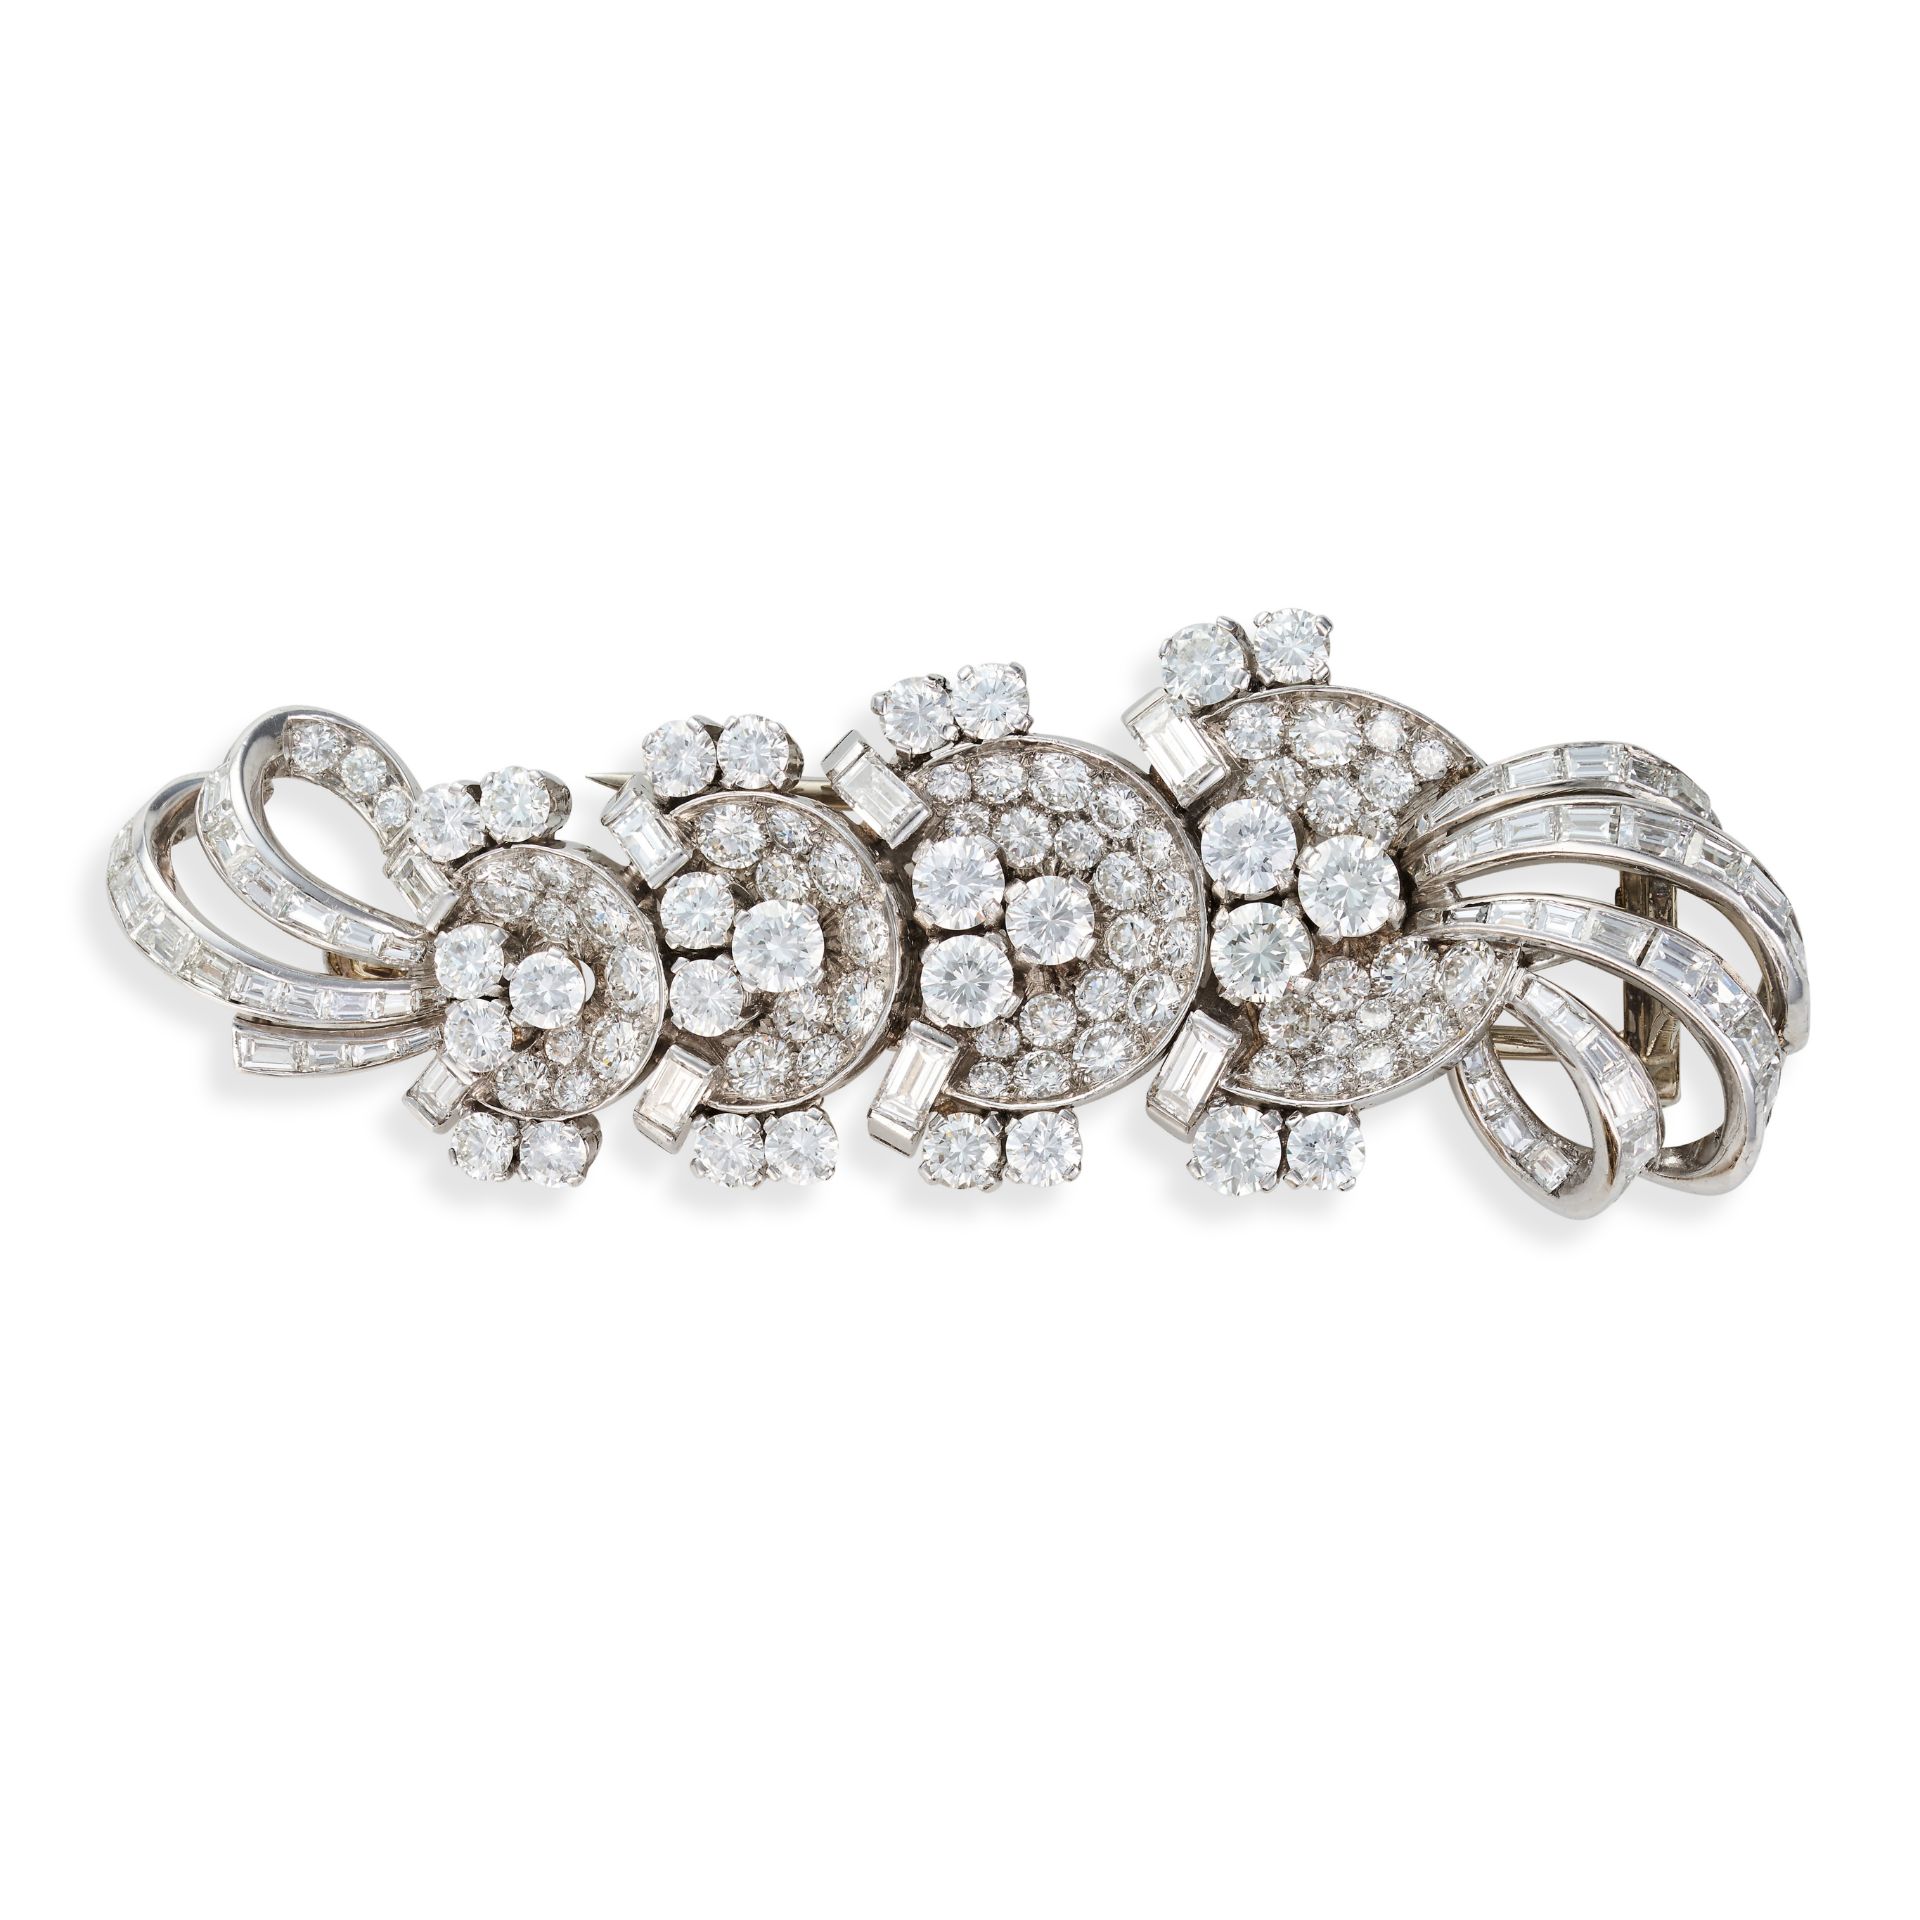 BULGARI, A FINE VINTAGE DIAMOND BROOCH the scrolling brooch set throughout with round brilliant a...